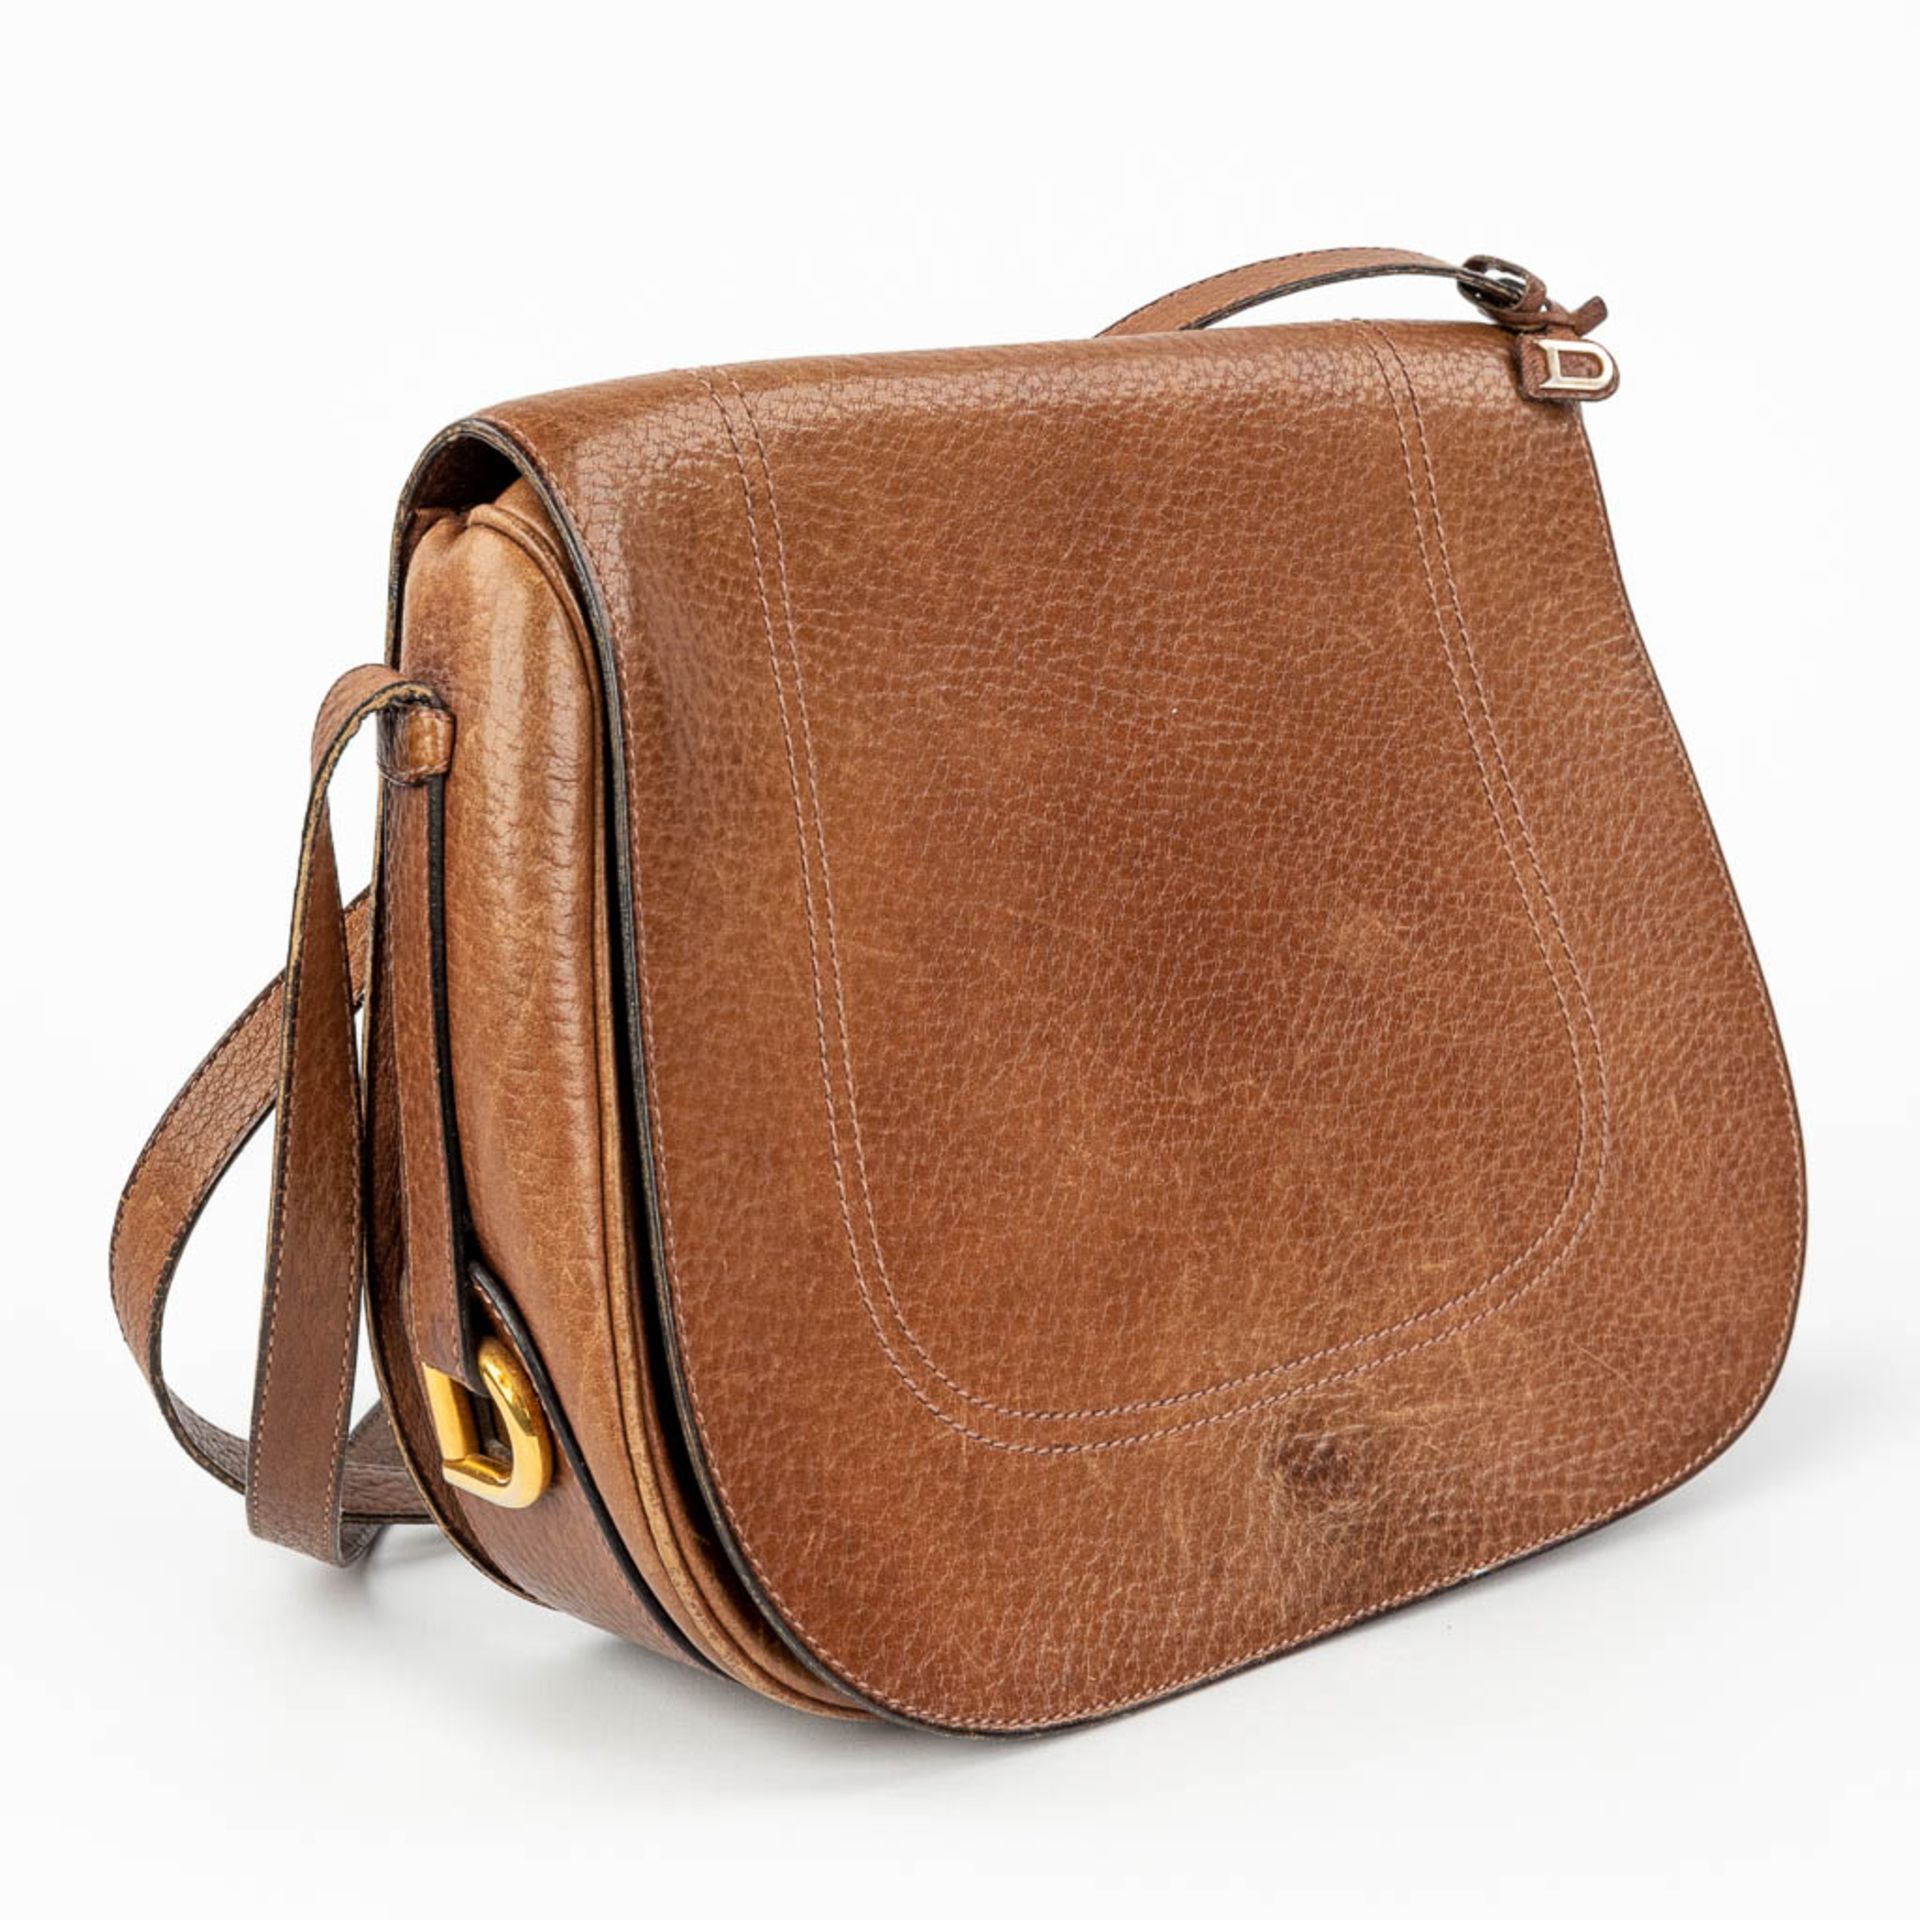 Delvaux, a cross-body handbag made of brown leather. (W:26 x H:22 cm)